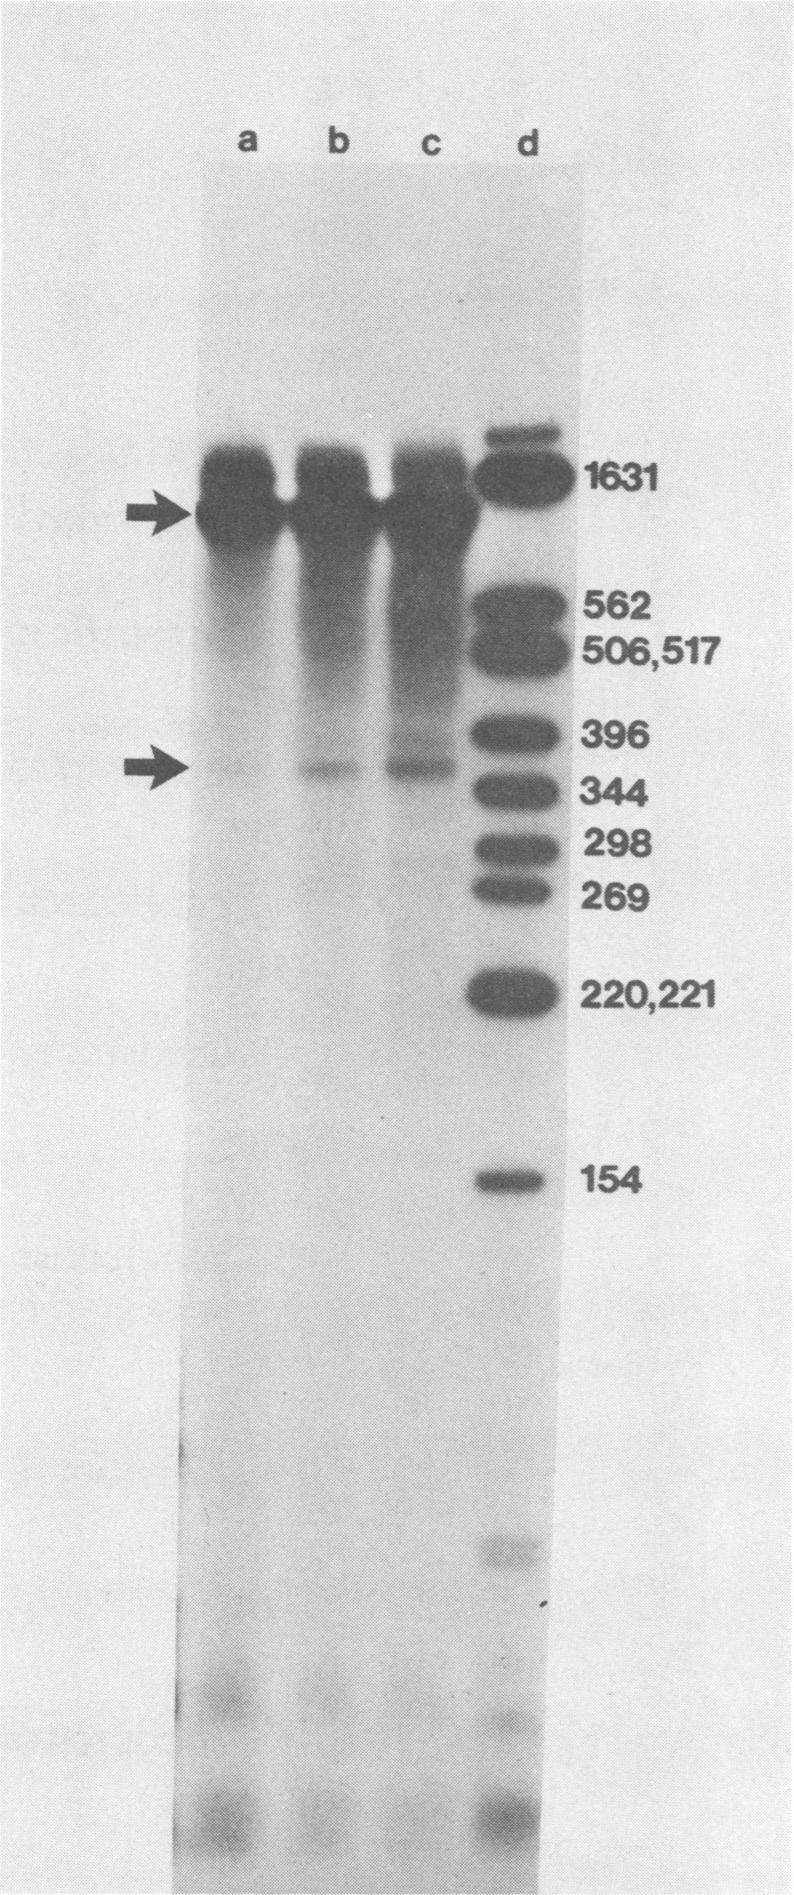 VOL. 42, 1982 SEQUENCE OF INFLUENZA B RNA SEGMENT 8 189 a b c d +163~~~~163 4. ~ 439 562.;.w 506,517 :-!.L 396 298 269 4fl 220,221-154 FIG. 4. Analysis of the influenza B virus NS1 and NS2 mrnas by the S1 nuclease technique.